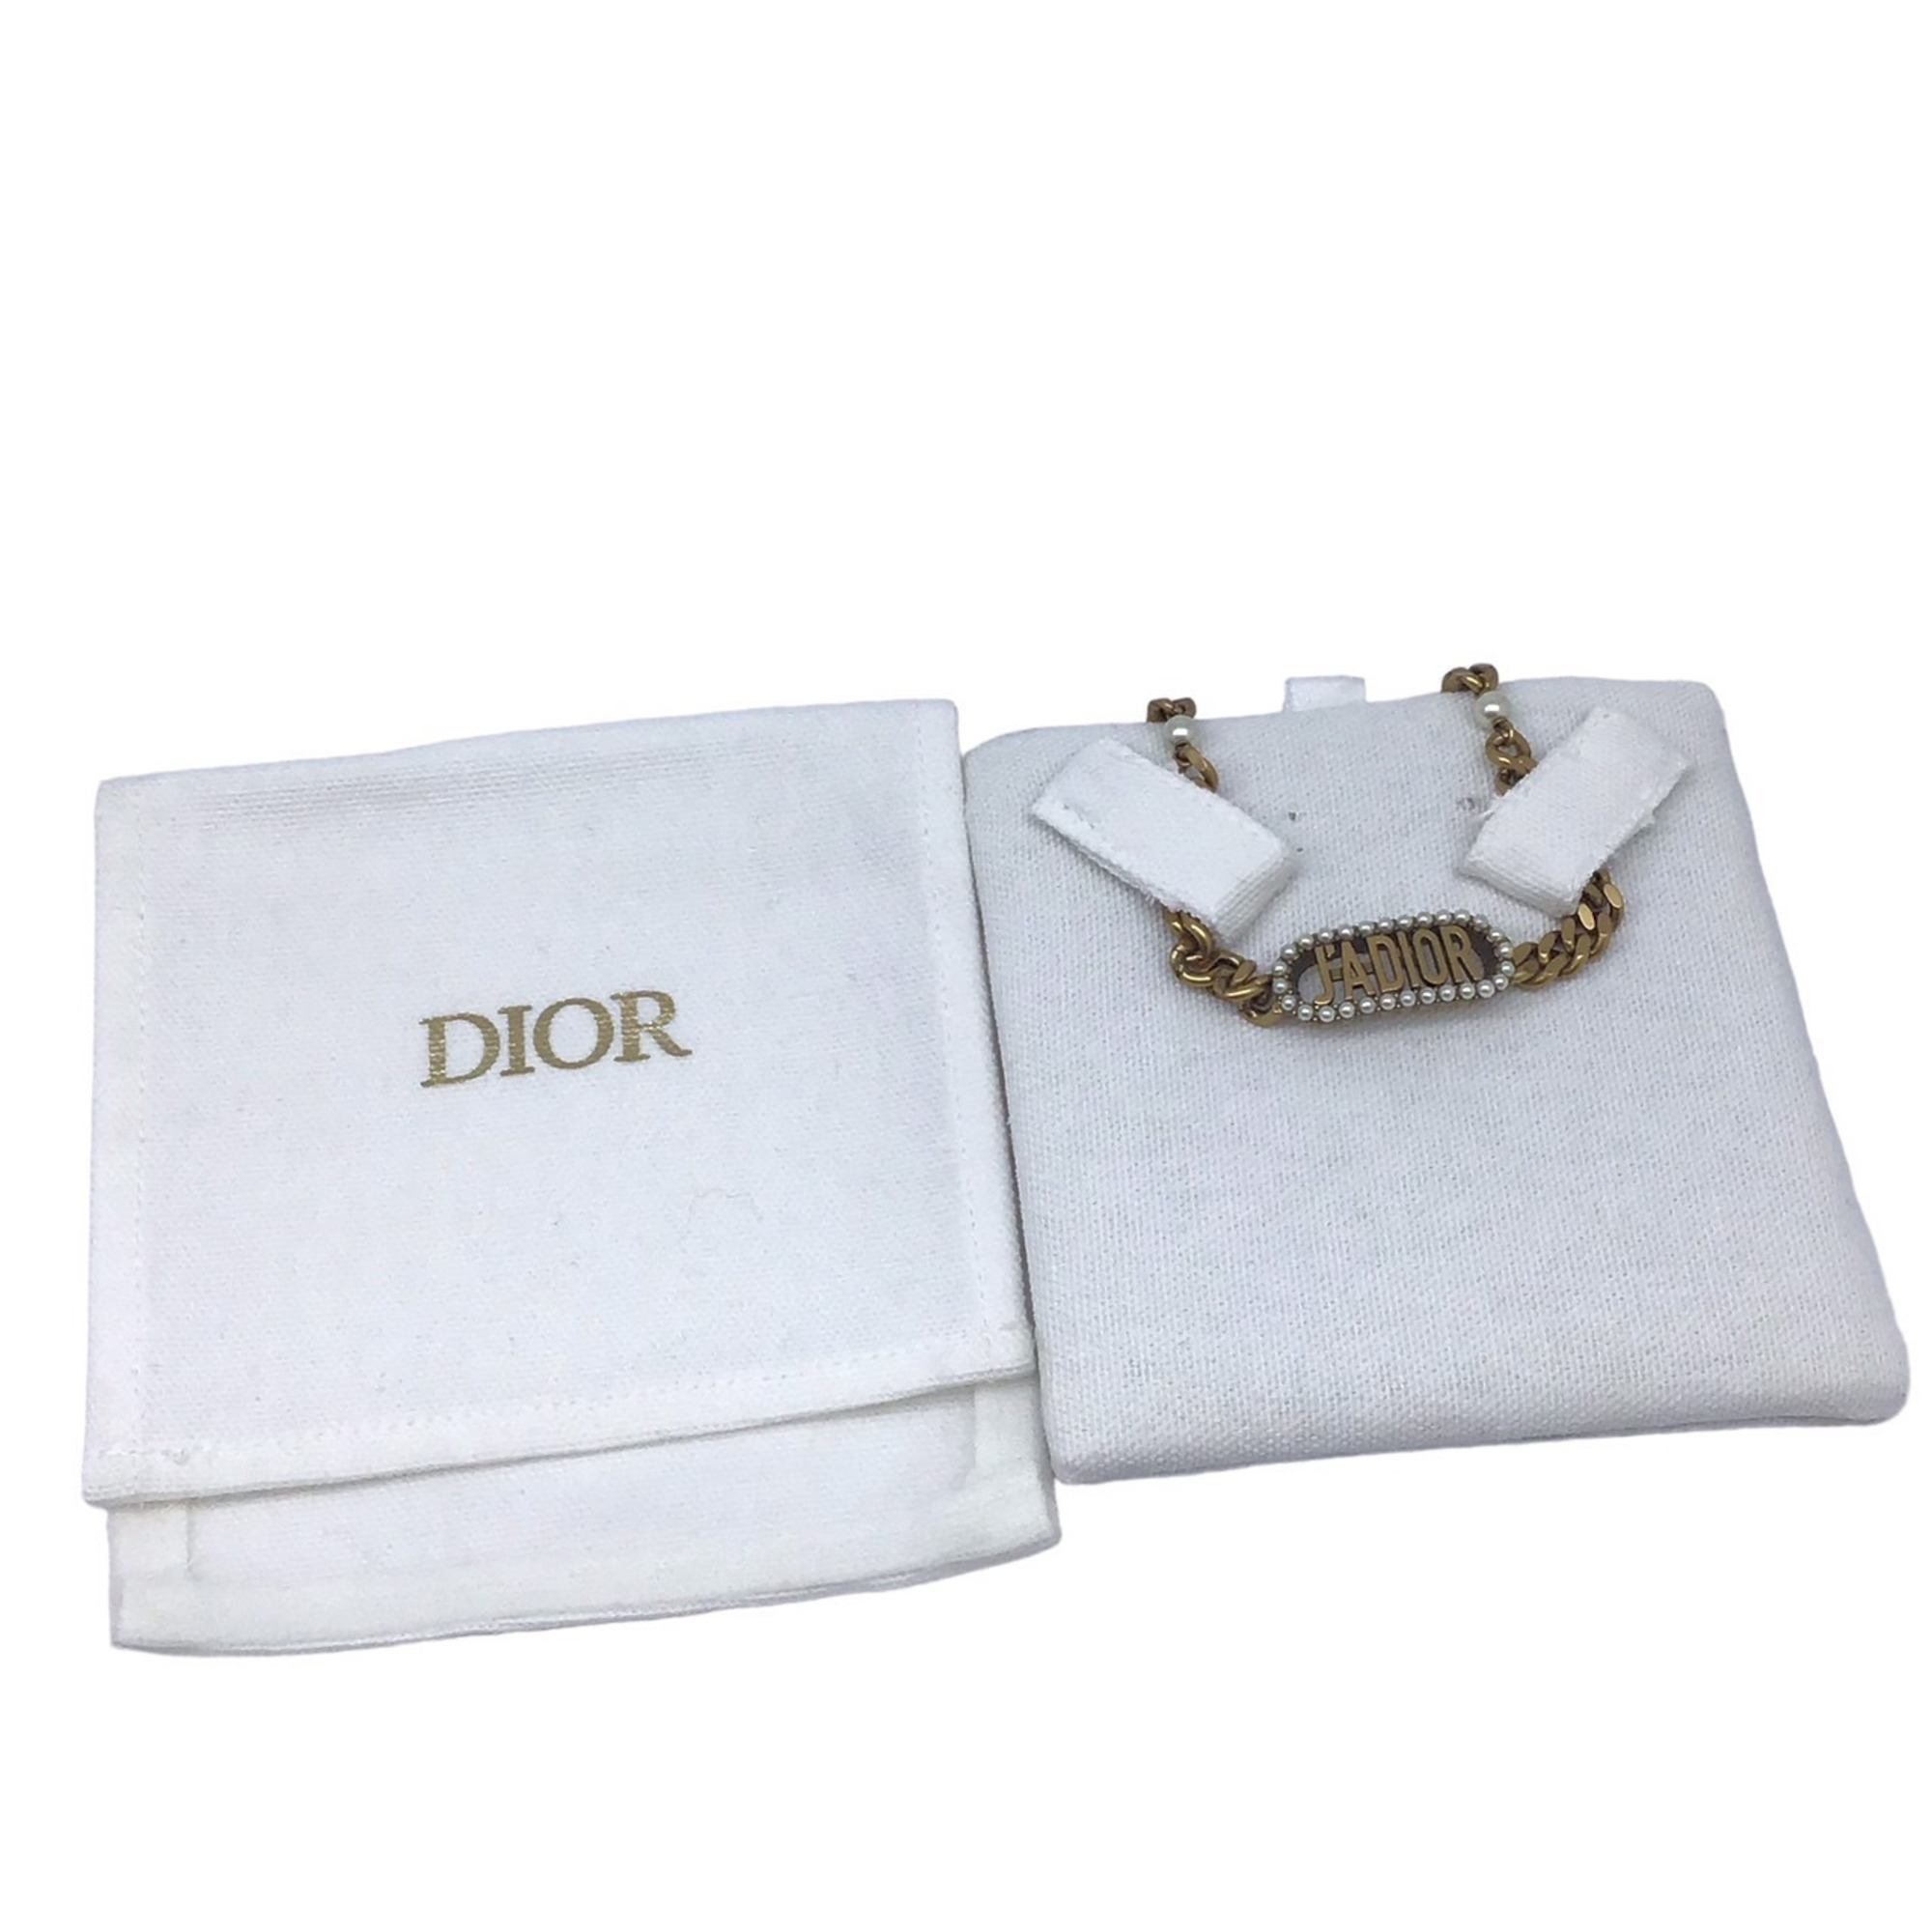 Christian Dior DIOR J'ADIOR Chain Link Choker Necklace Neck Gold GP Plated Collar Women's